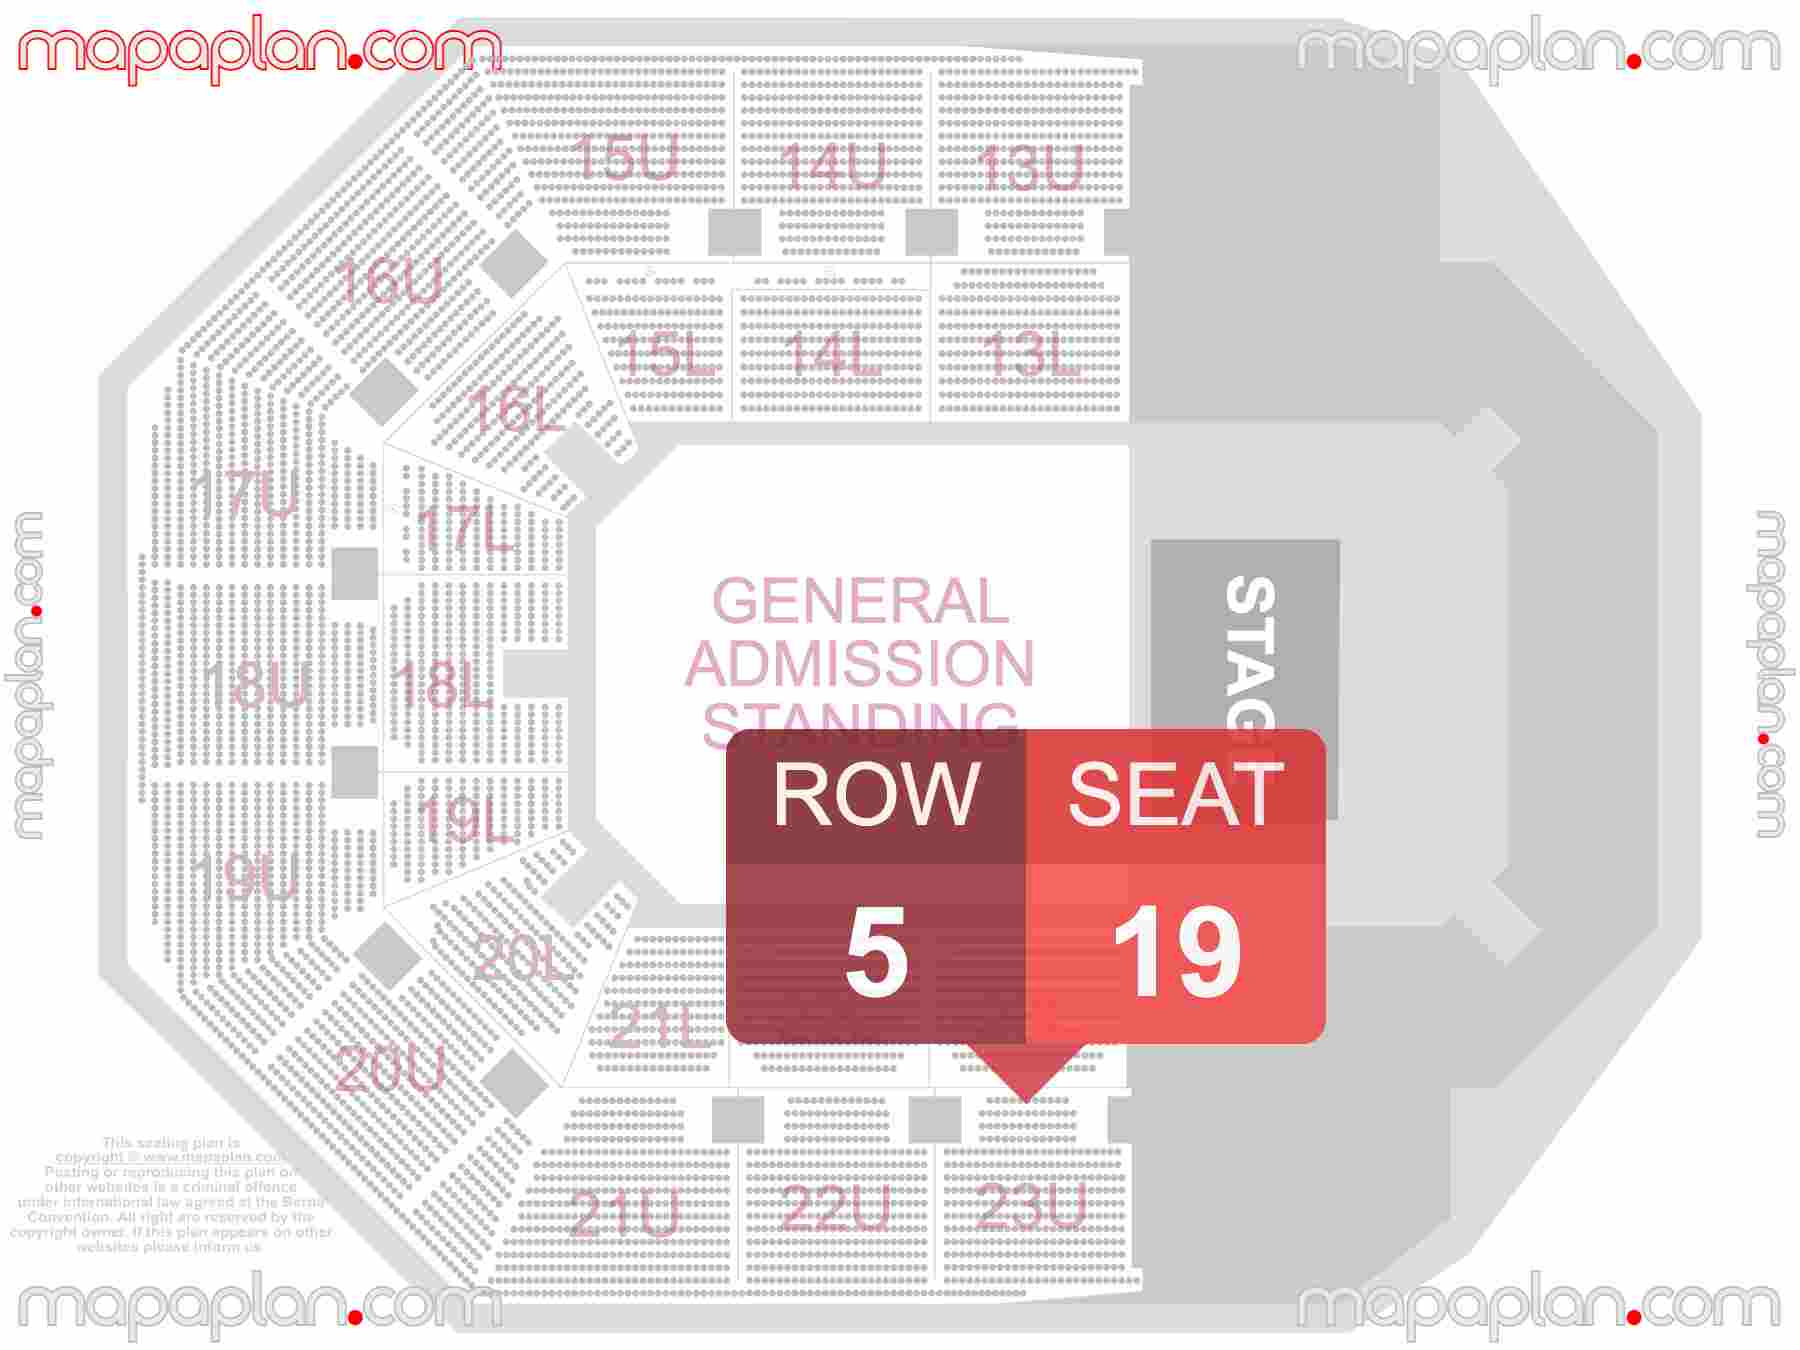 Auckland Spark Arena seating map Concert with floor general admission standing inside capacity view arrangement plan - Interactive virtual 3d best seats & rows detailed stadium image configuration layout